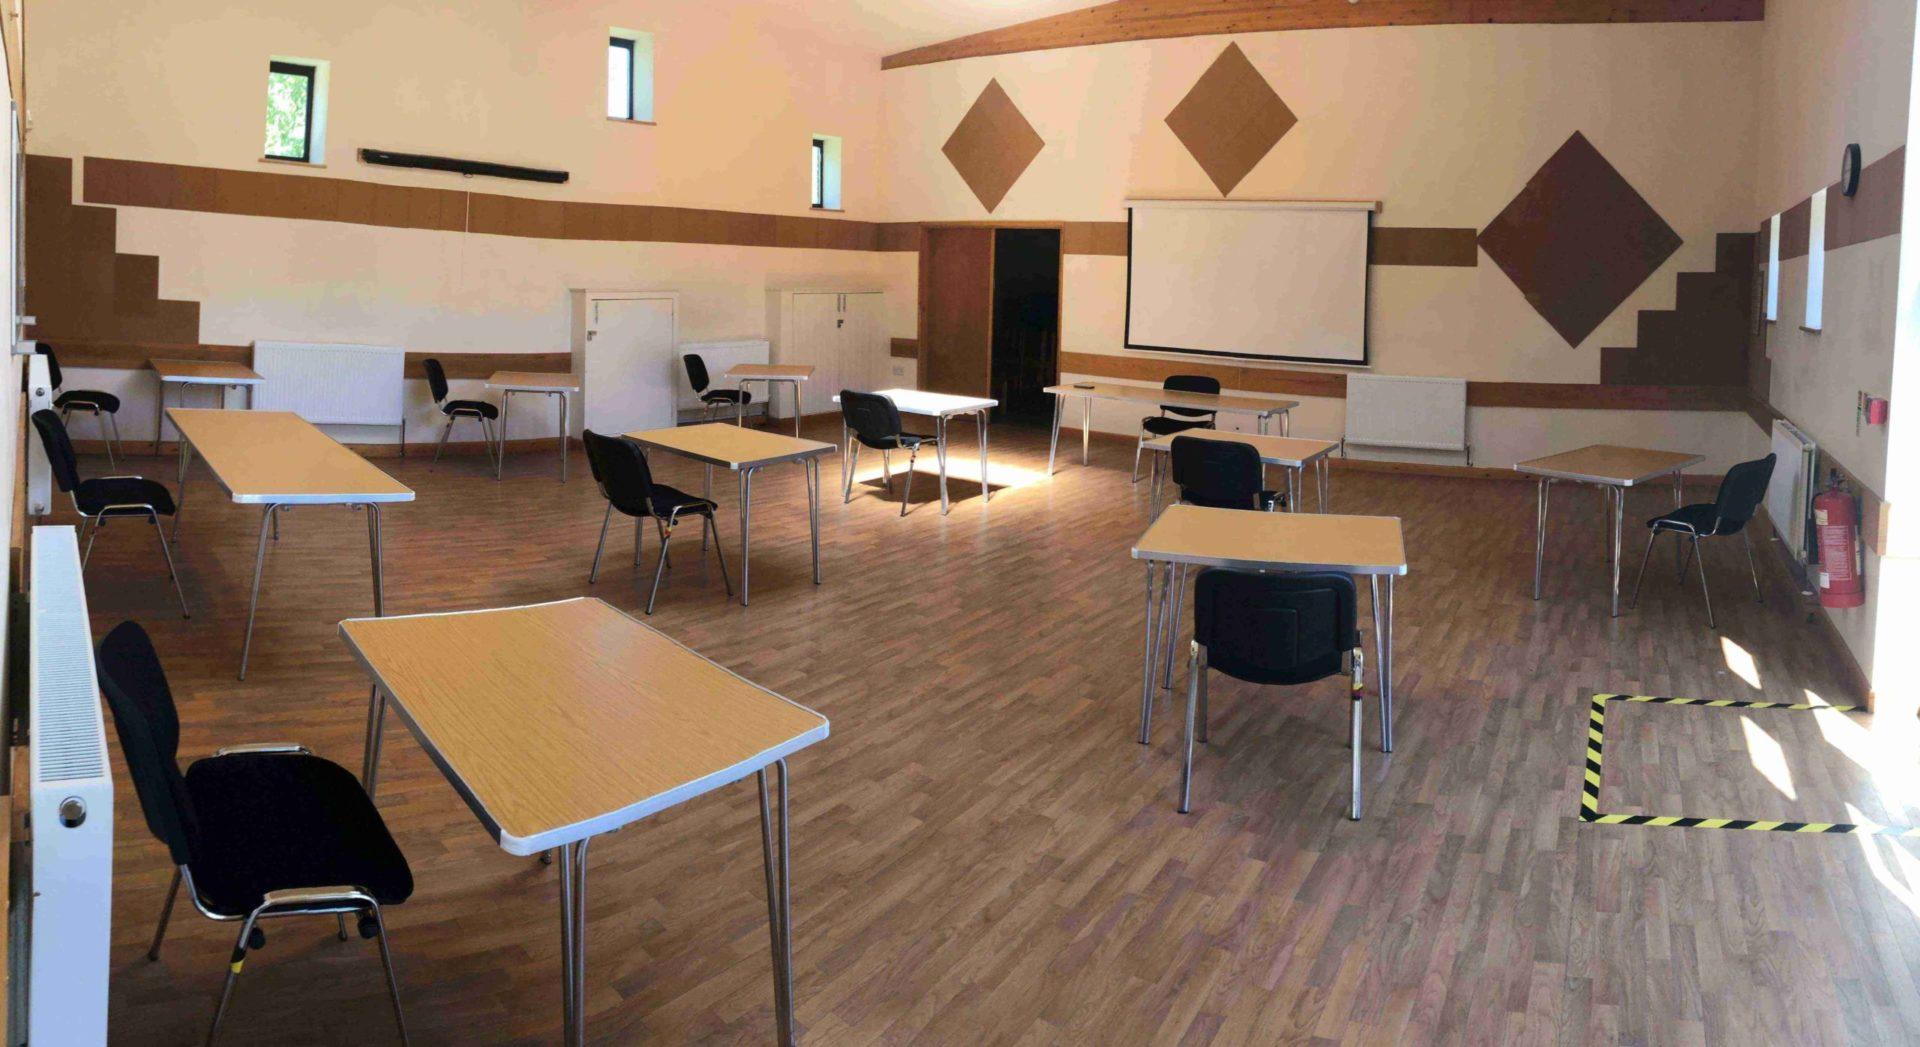 Room, Hall & Conference Hire